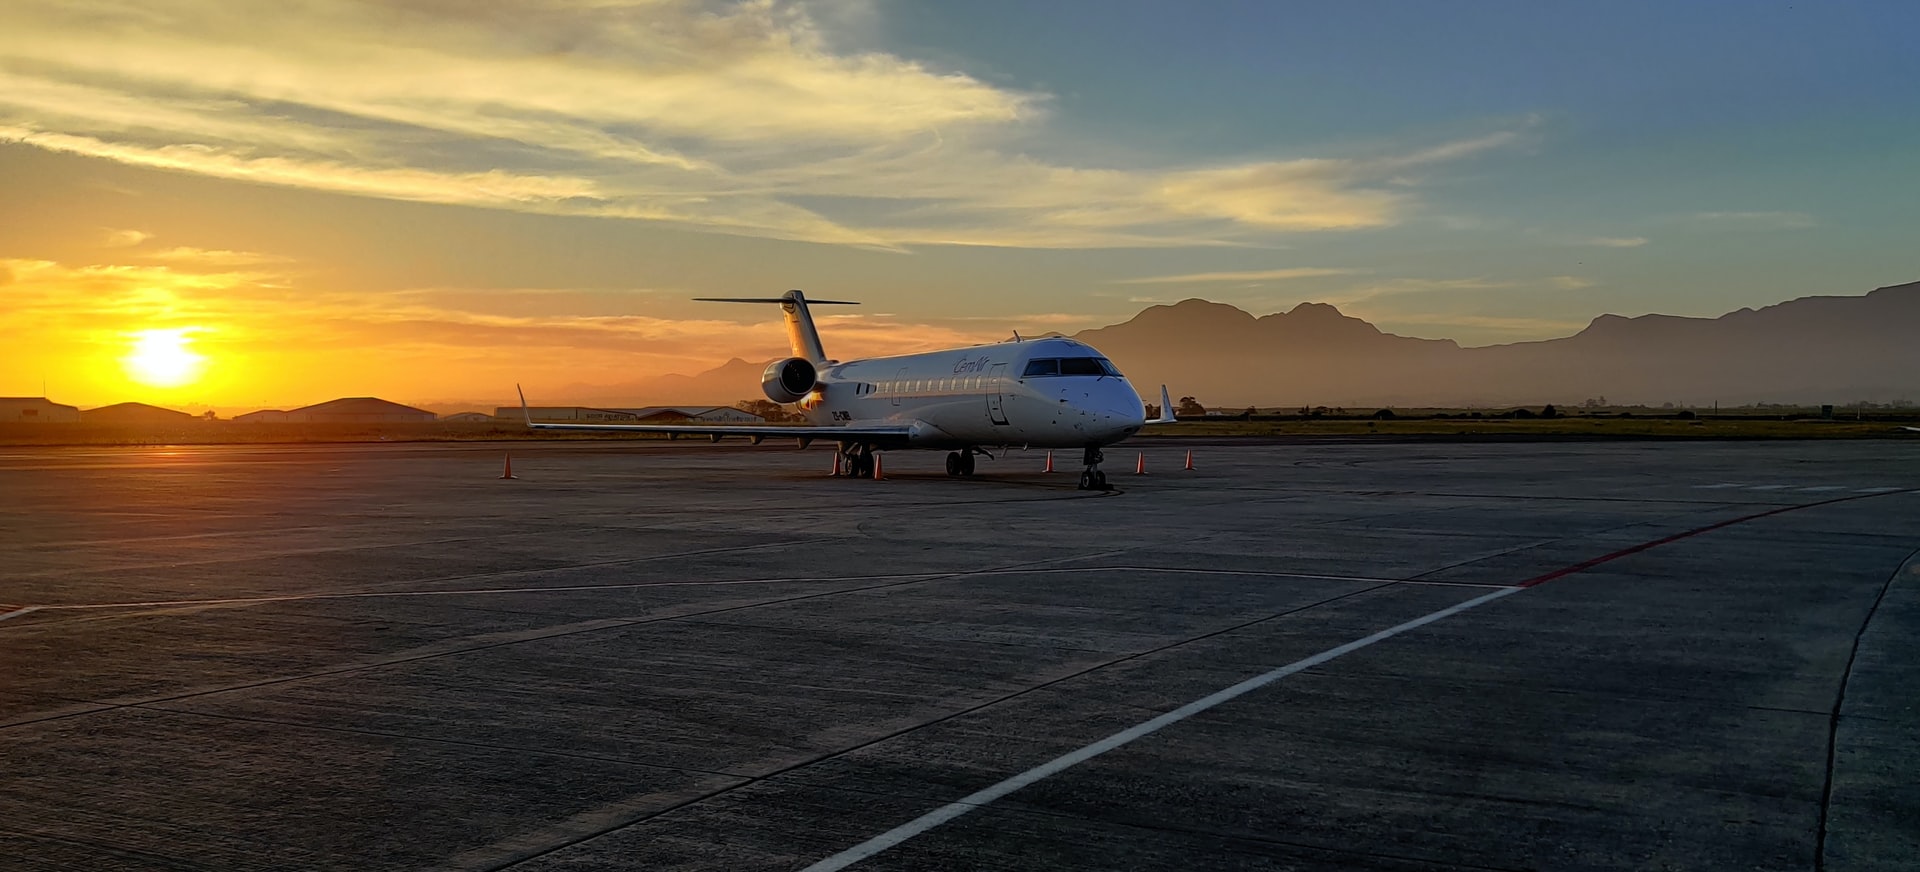 Top Amenities You Can Expect On a Private Jet Charter Flight